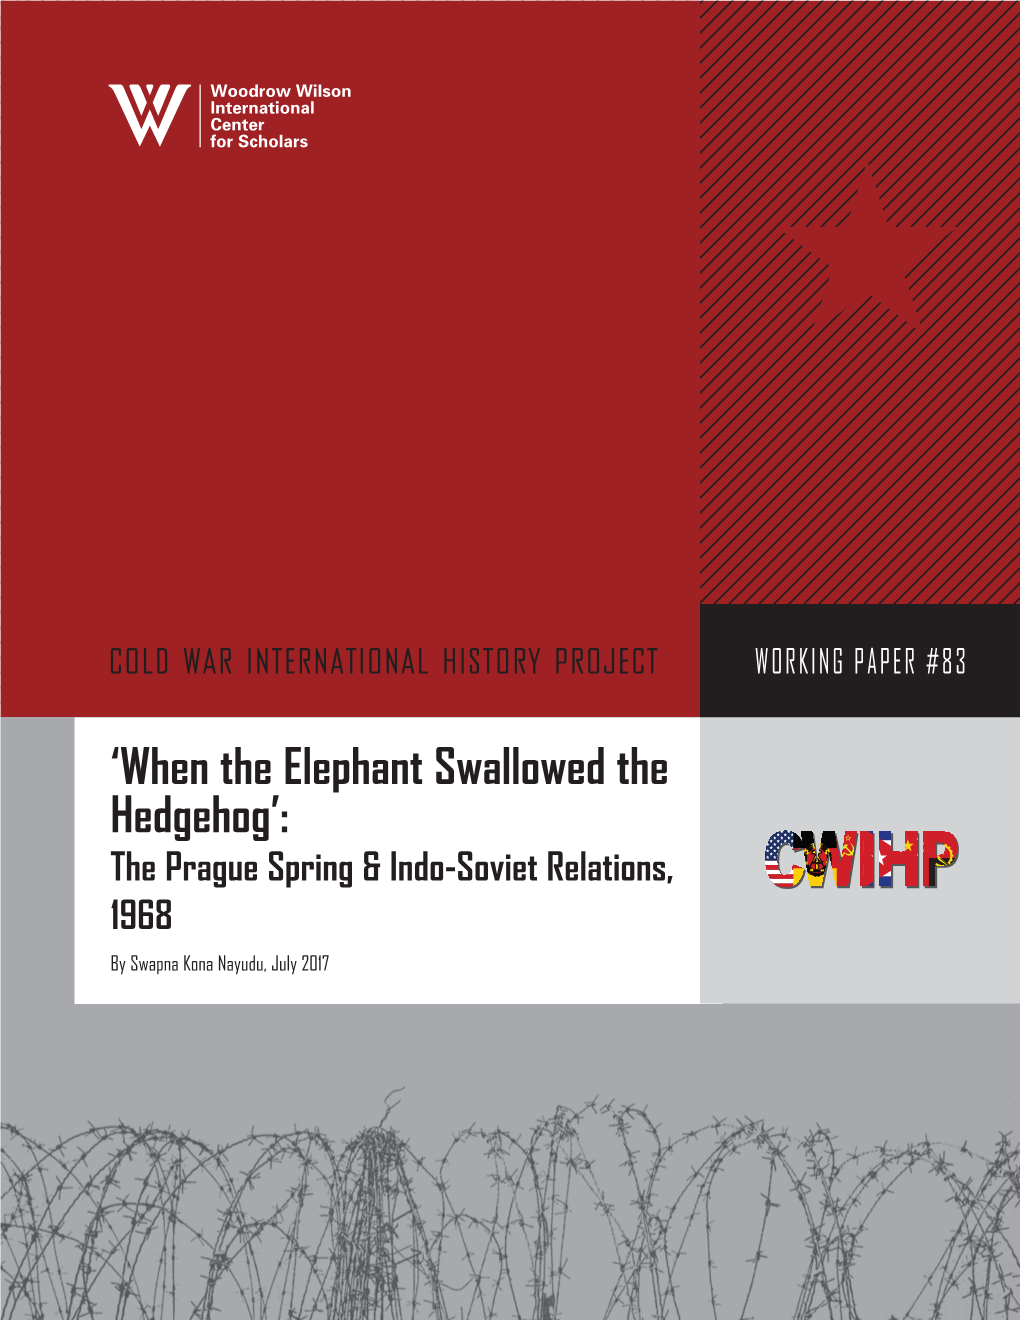 'When the Elephant Swallowed the Hedgehog': the Prague Spring